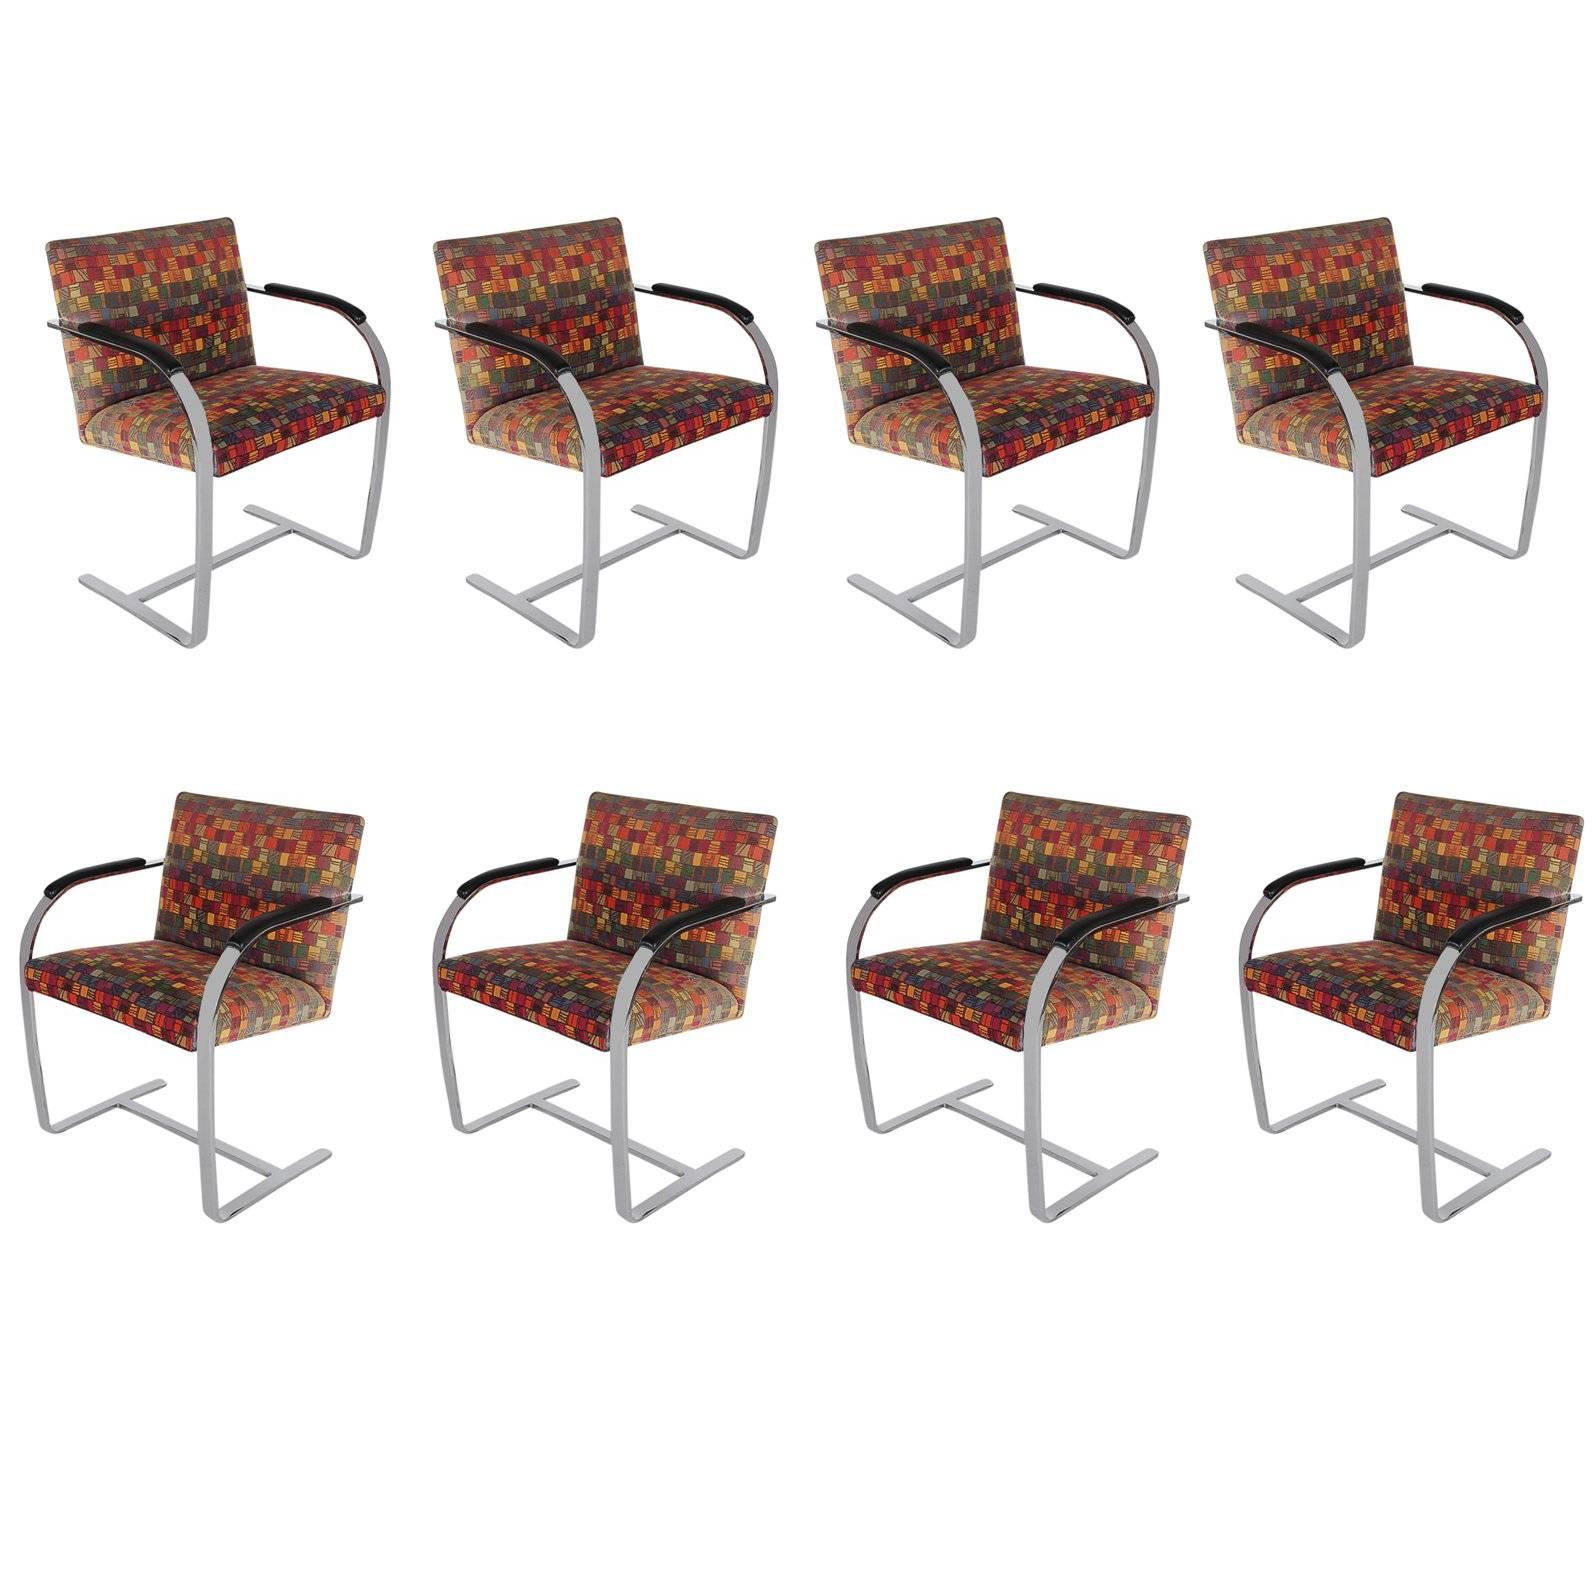 Set of Eight Mid-Century Modern Flat Bar Brno Armchair Dining Chairs for Knoll